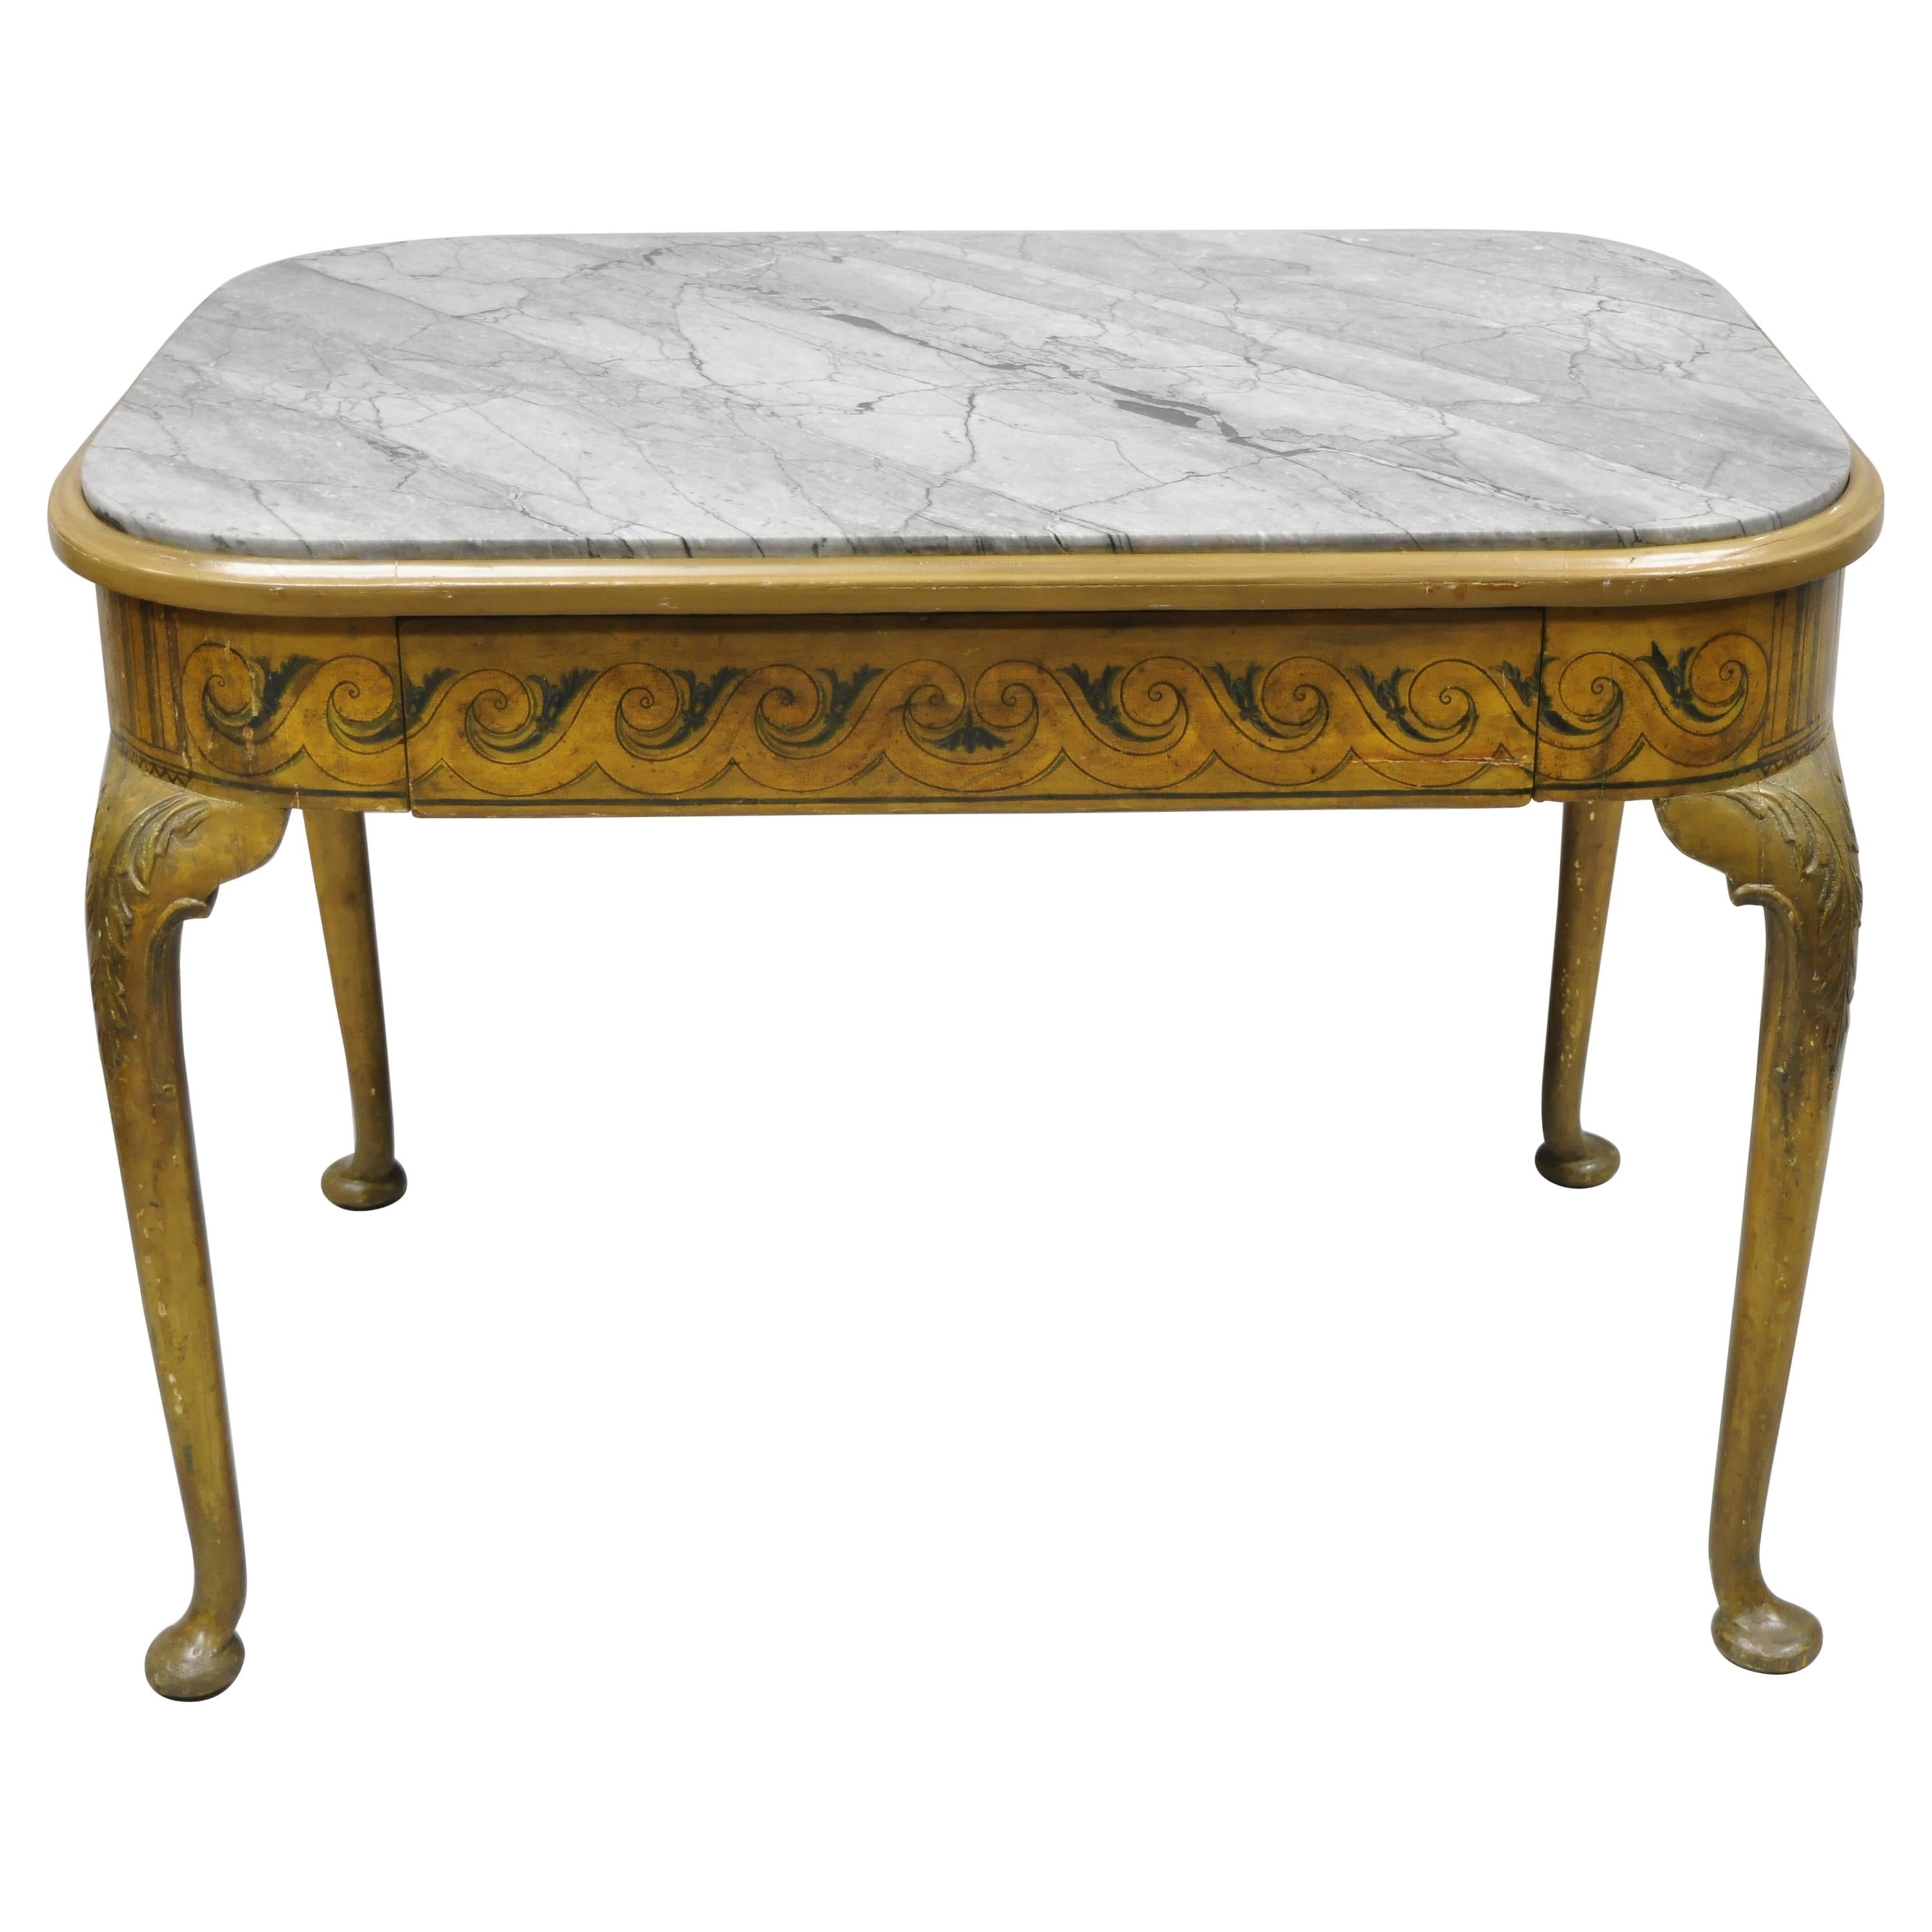 Antique French Adams Style Hand Painted Queen Anne One Drawer Center Table For Sale